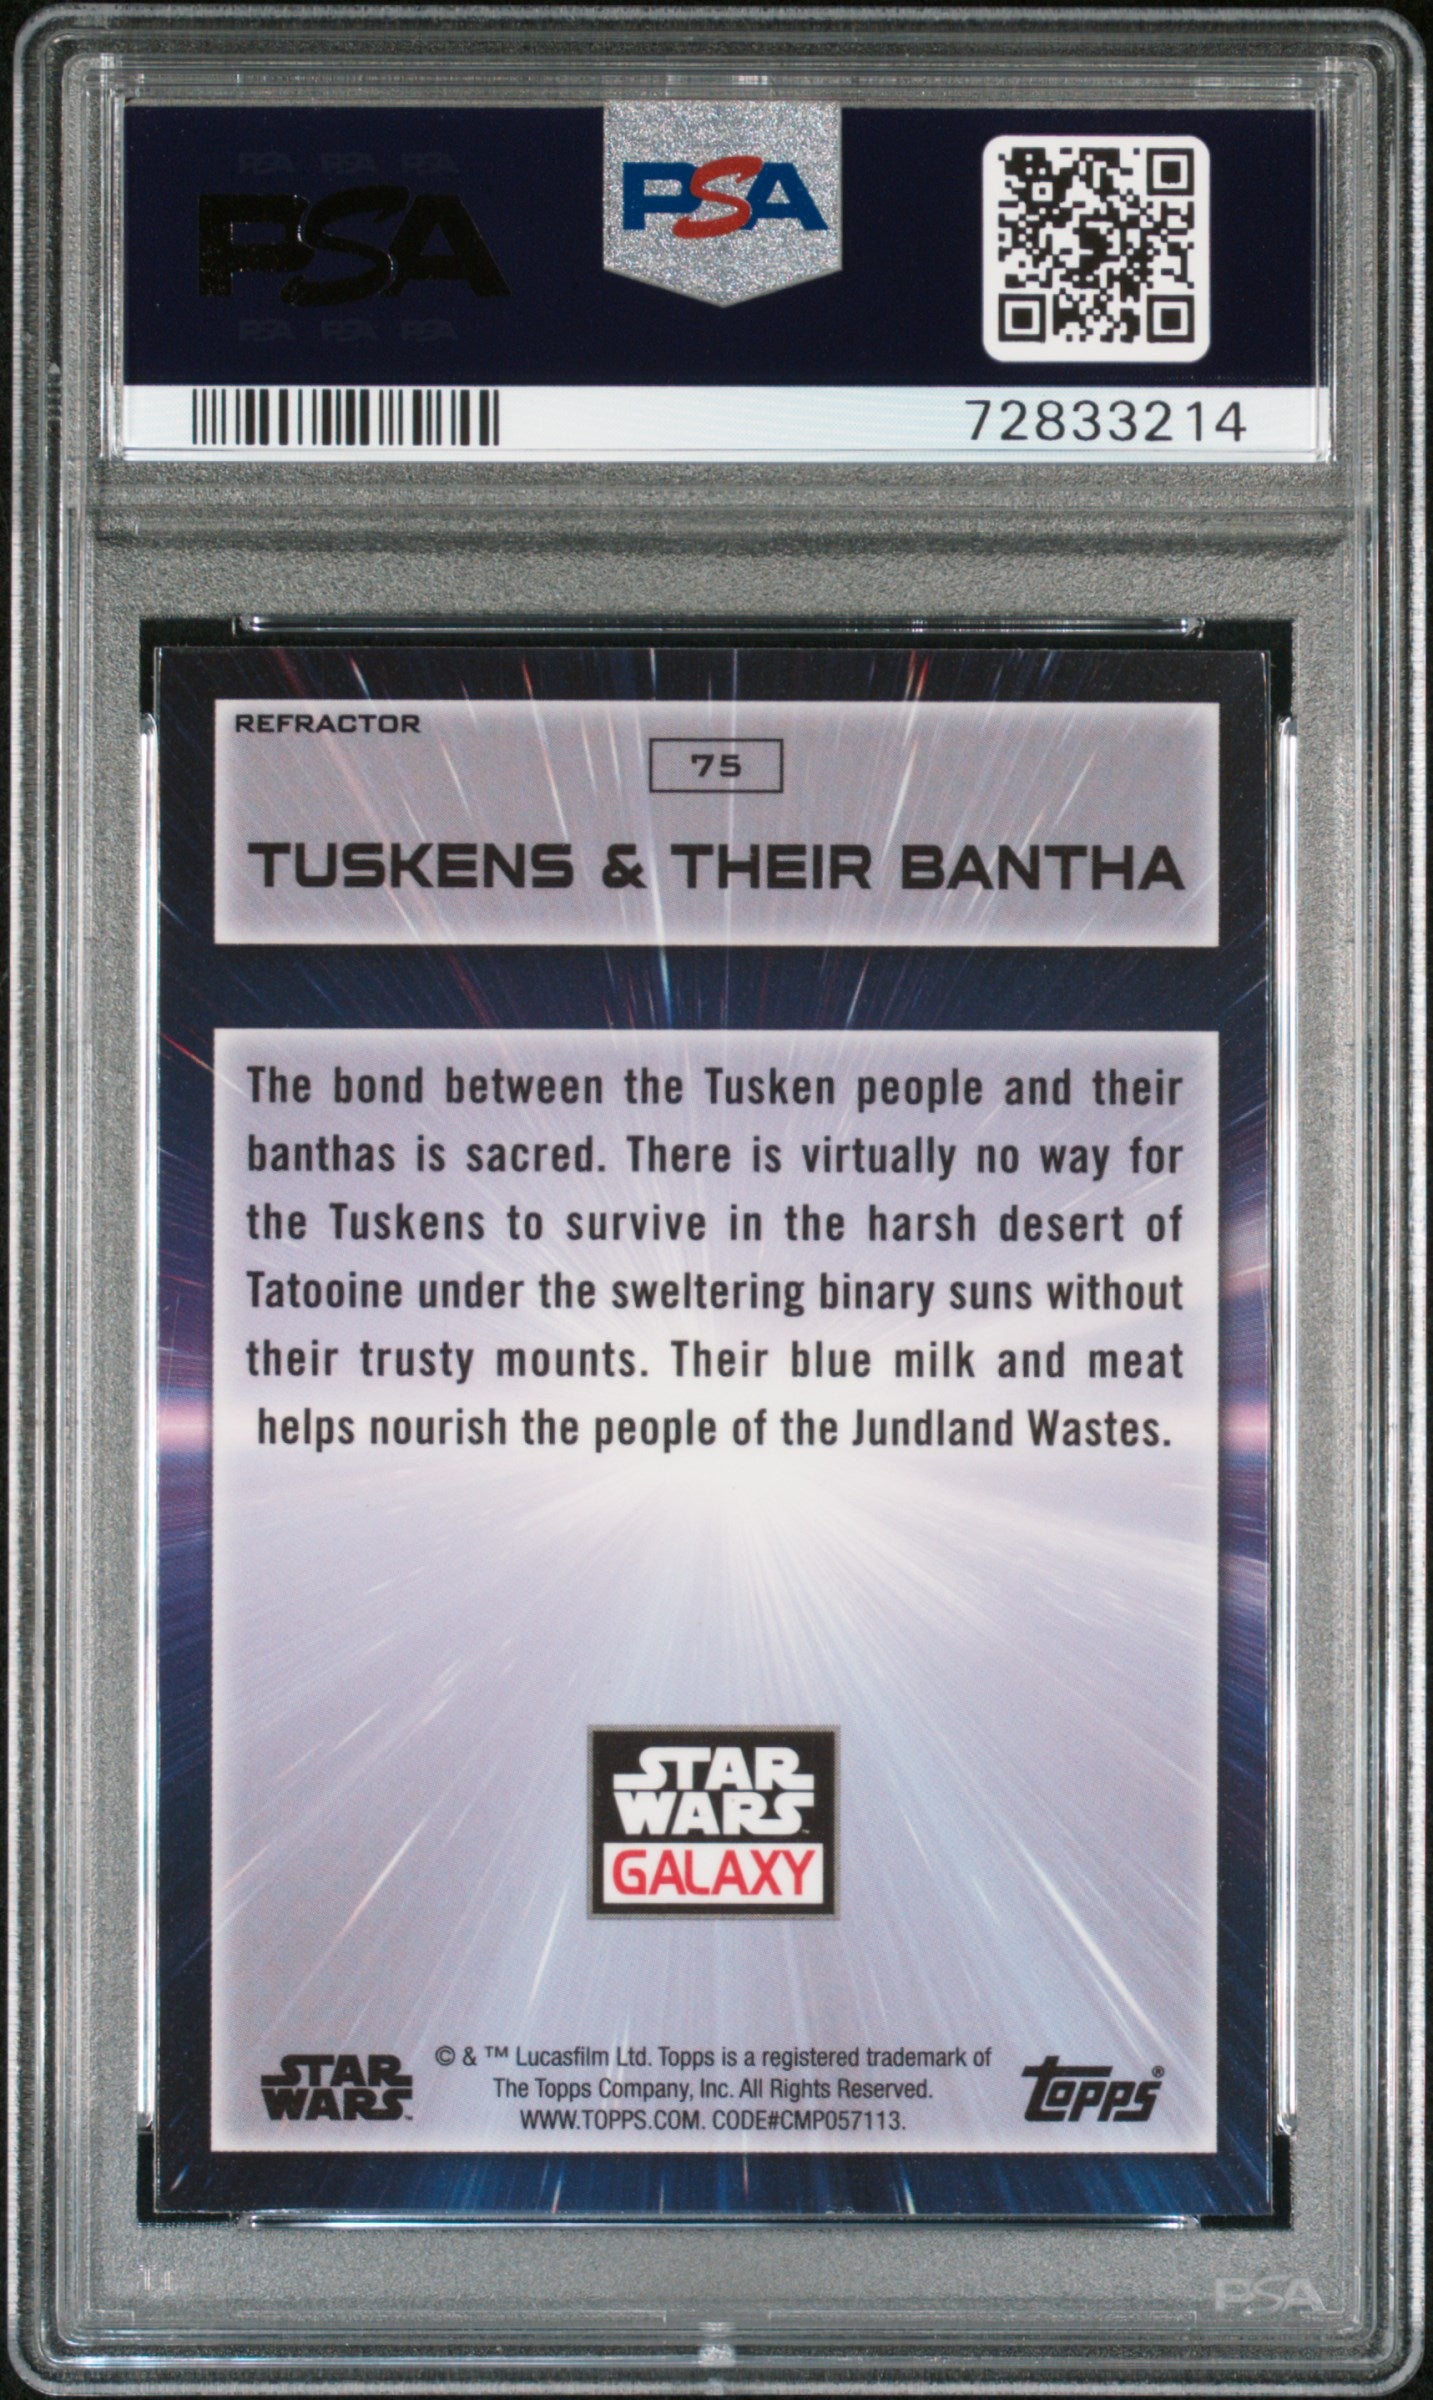 2022 Topps Chrome Star Wars Galaxy 75 Tuskens & Their Bantha Refractor Psa 9